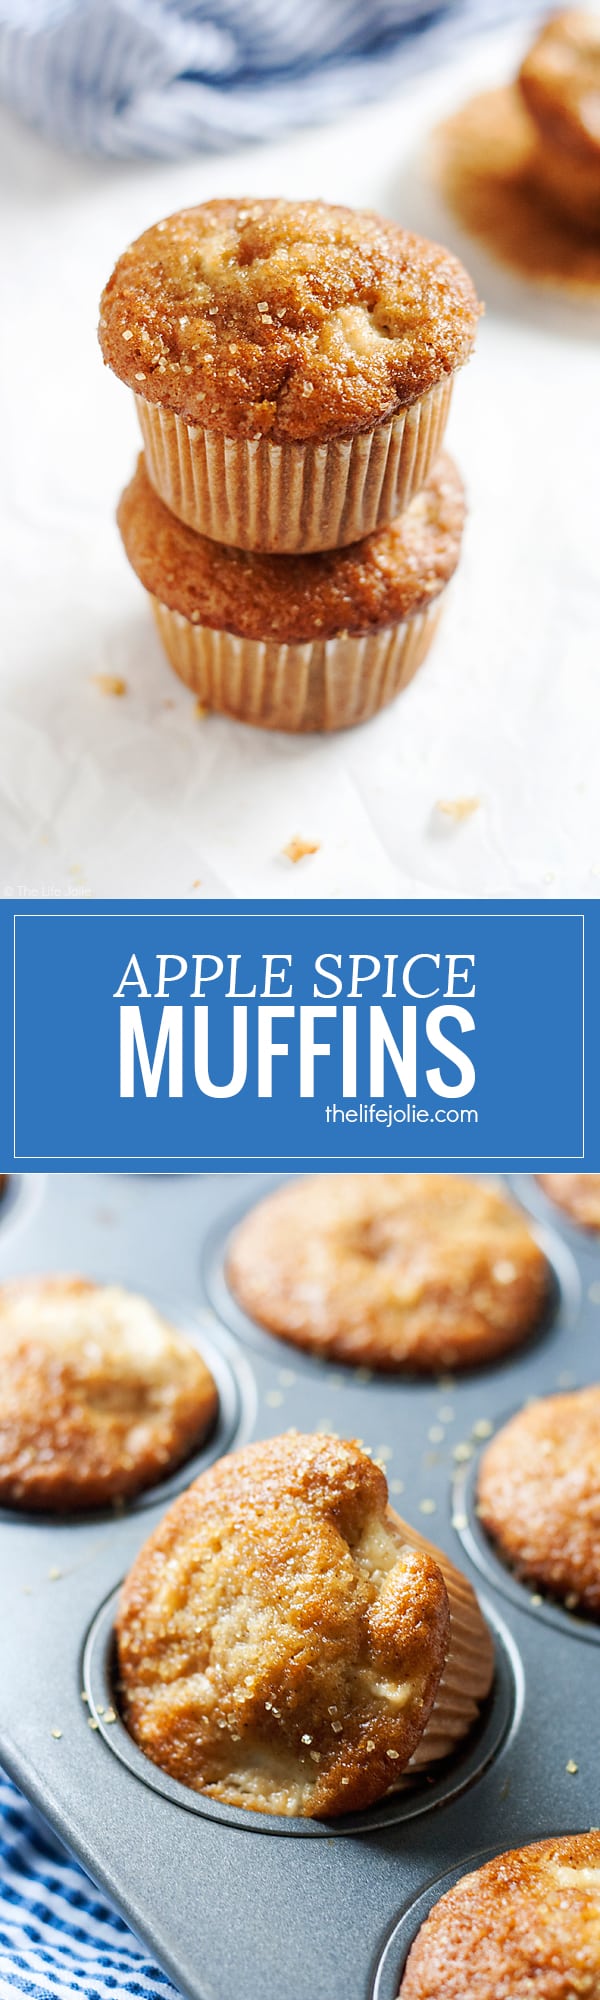 Apple Spice Muffins are one of my favorite fall recipes. Made with tasty chunks of apple, applesauce with cinnamon, nutmeg and ginger, they're so easy to make and taste great as breakfast or as a dessert!